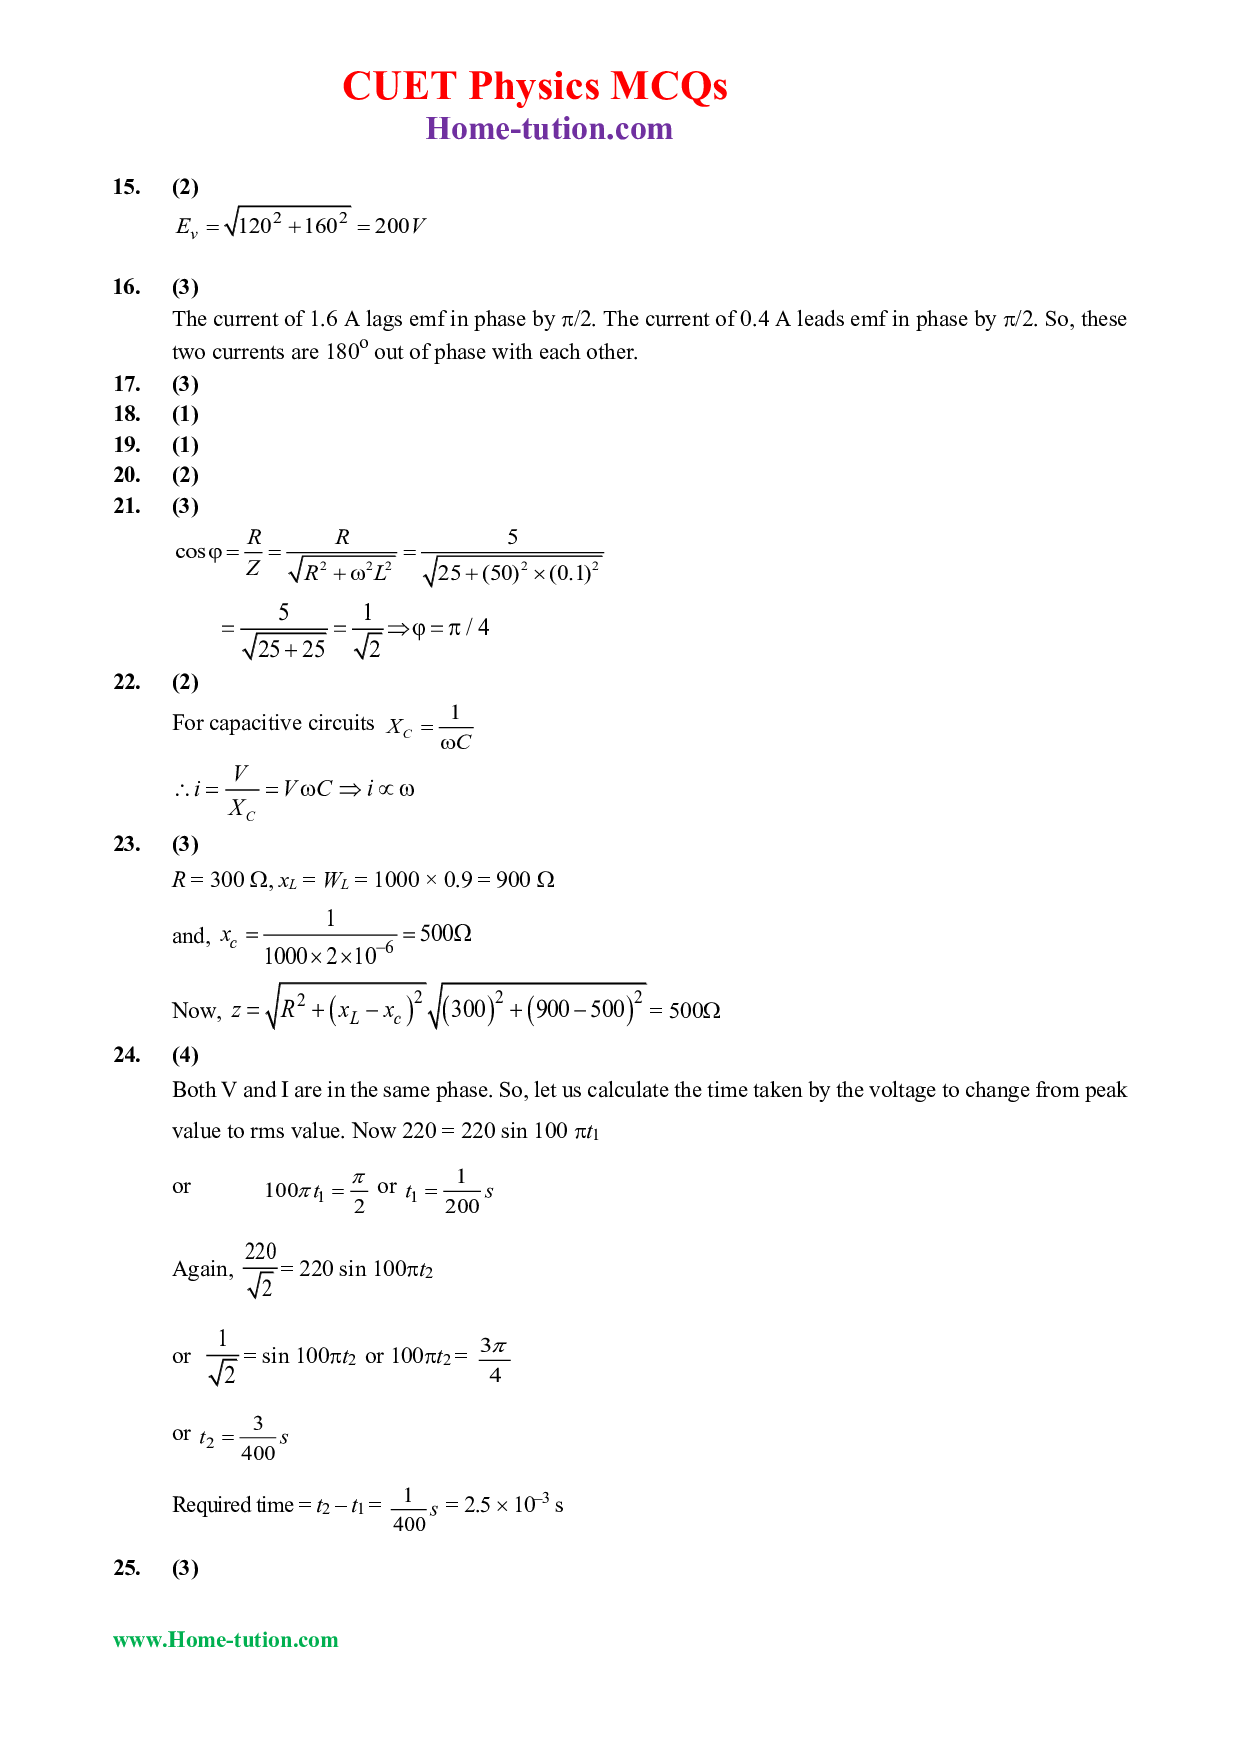 CUET MCQ Questions For Physics Chapter-07 Alternating Current